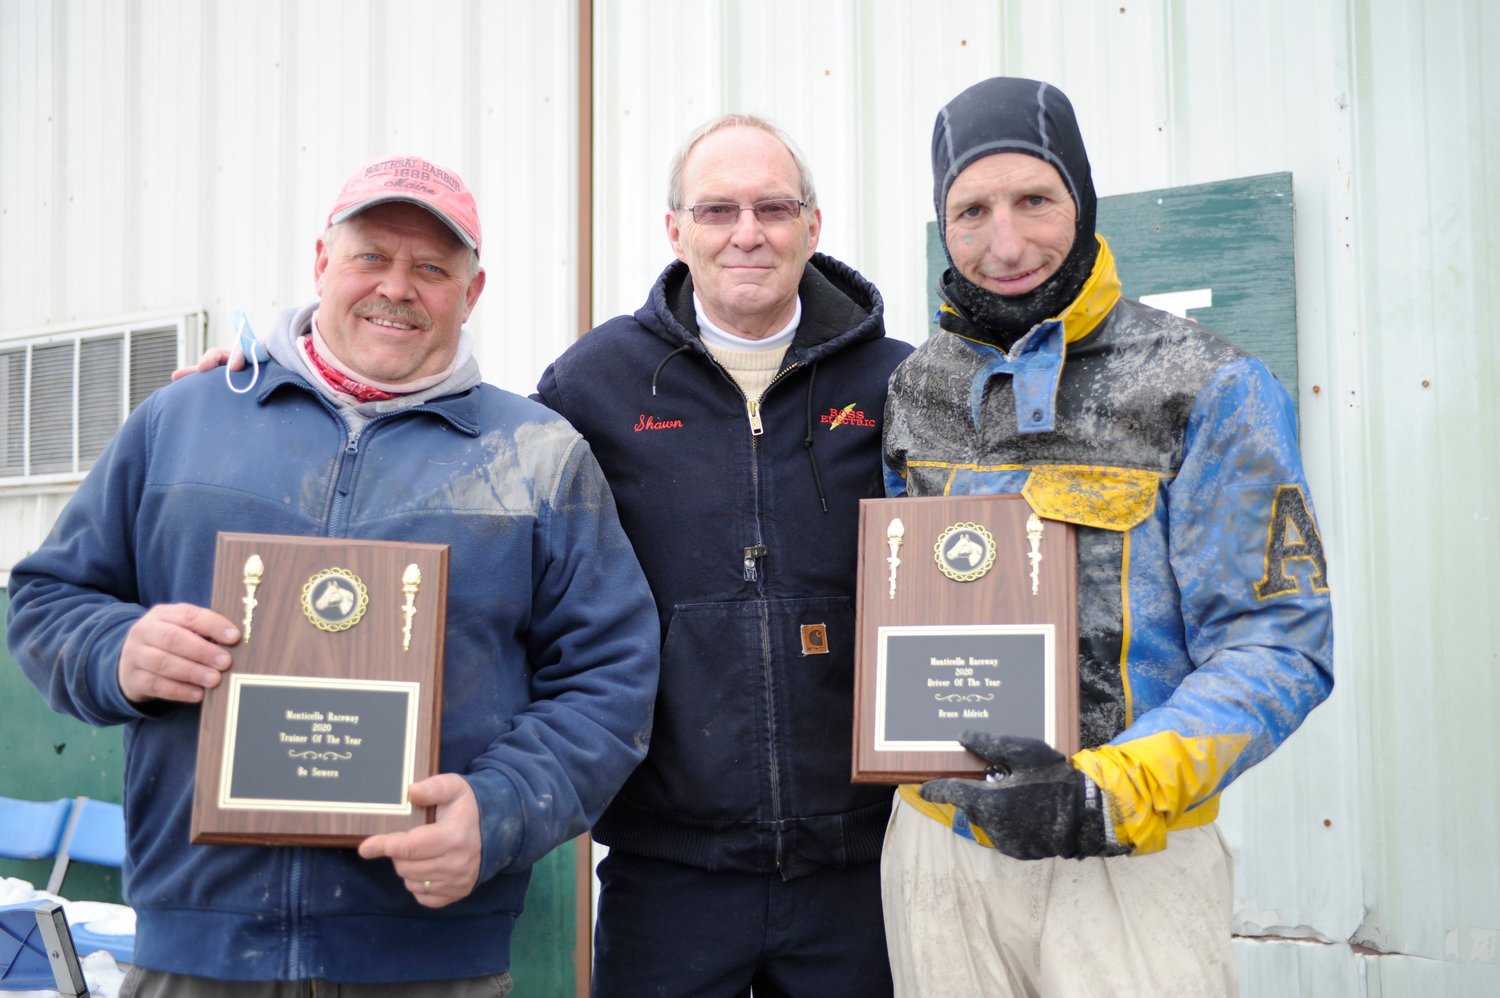 High stakes and top honor. Pictured are Philip “Bo” Sowers Jr. (Monticello Raceway’s 2020 Trainer of the Year), left, Shawn Wiles (executive director of racing and facilities) and Bruce Aldrich Jr. (Monticello Raceway’s 2020 Driver of the Year).